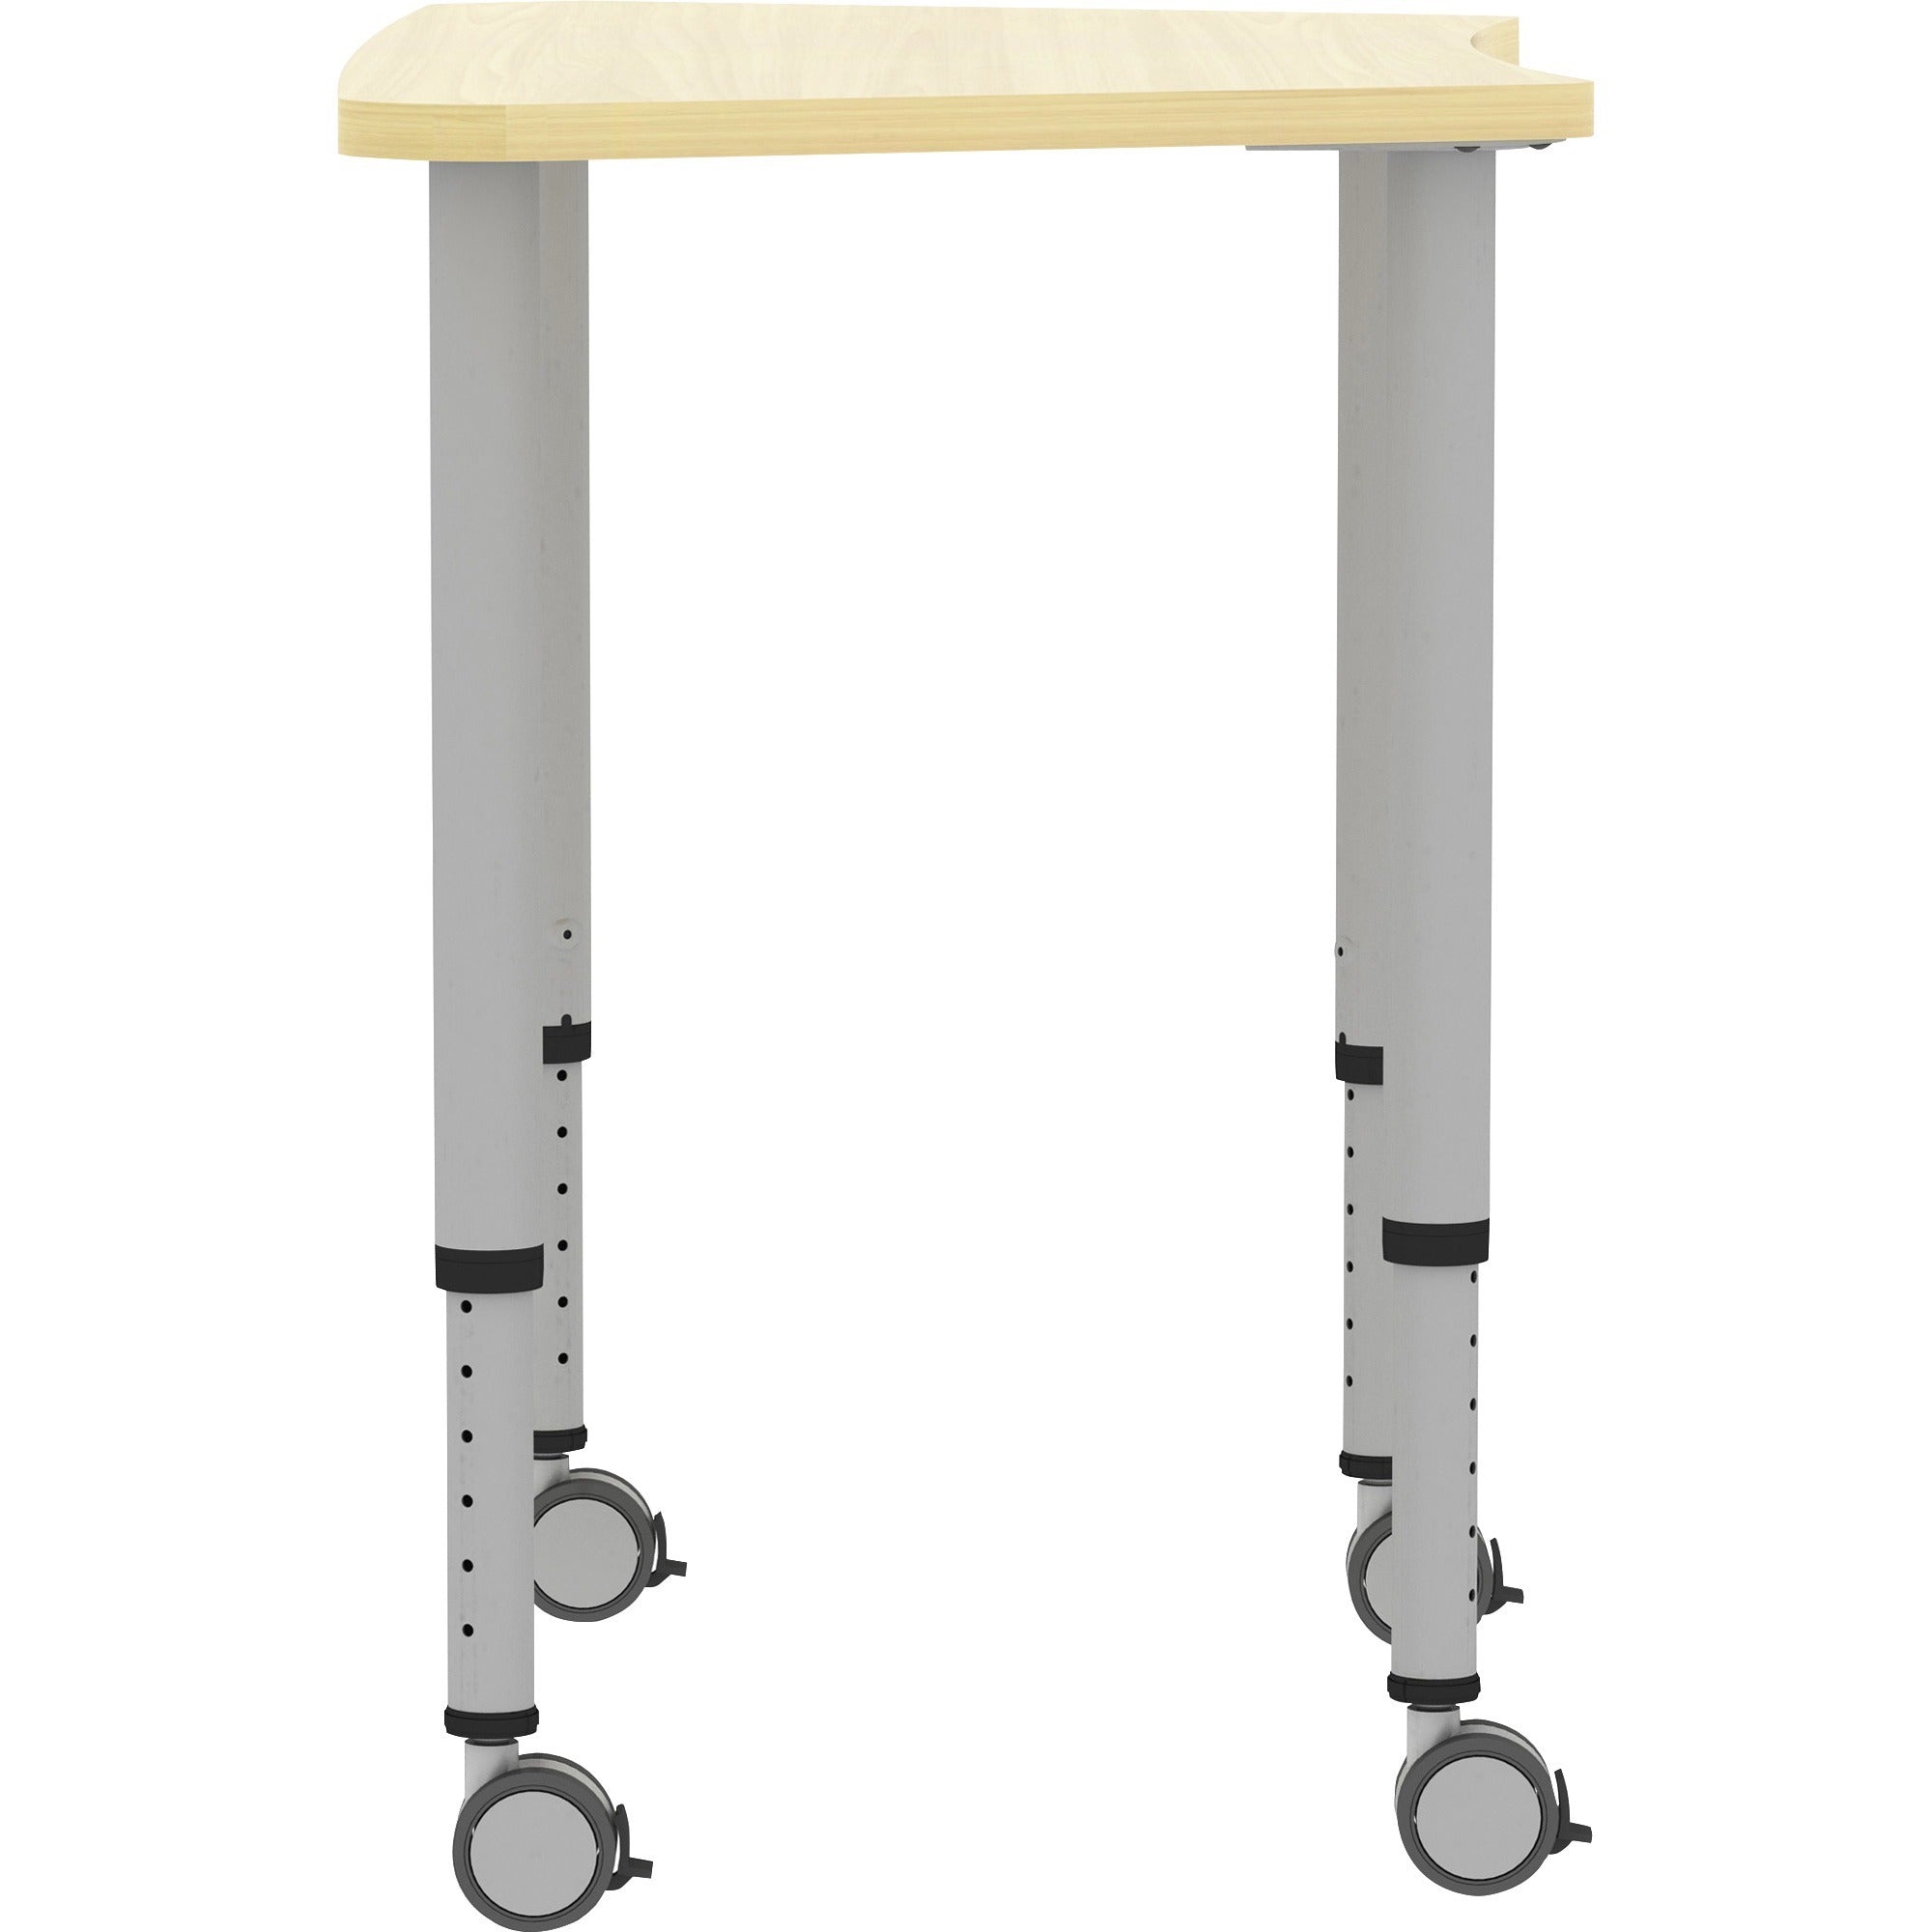 lorell-attune-height-adjustable-multipurpose-curved-table-for-table-toptrapezoid-top-adjustable-height-2662-to-3362-adjustment-x-60-table-top-width-x-2362-table-top-depth-3362-height-assembly-required-laminated-maple-laminat_llr69584 - 4